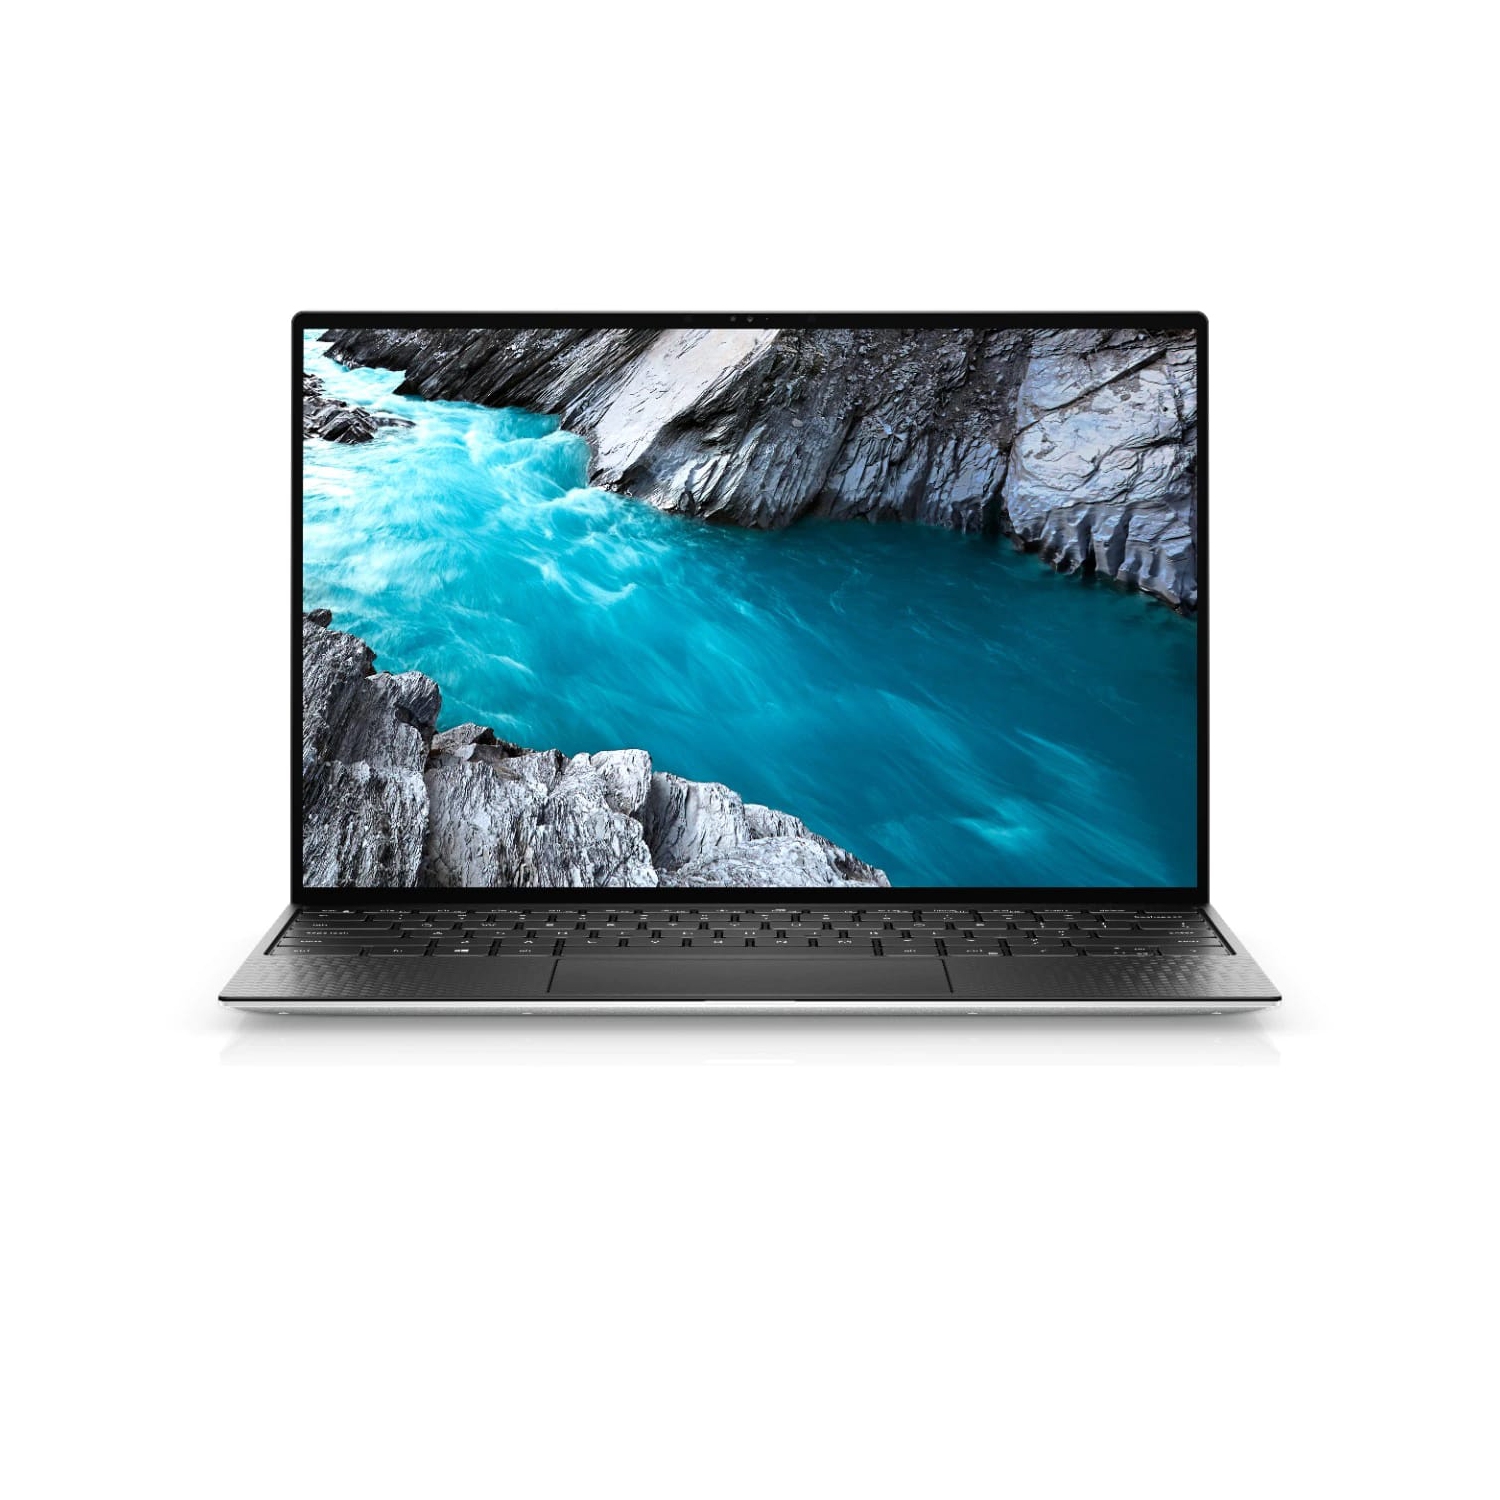 Dell XPS 9300 Laptop (2020) | 13.3" FHD+ | Core i5 - 256GB SSD - 8GB RAM | 4 Cores @ 3.6 GHz - 10th Gen CPU